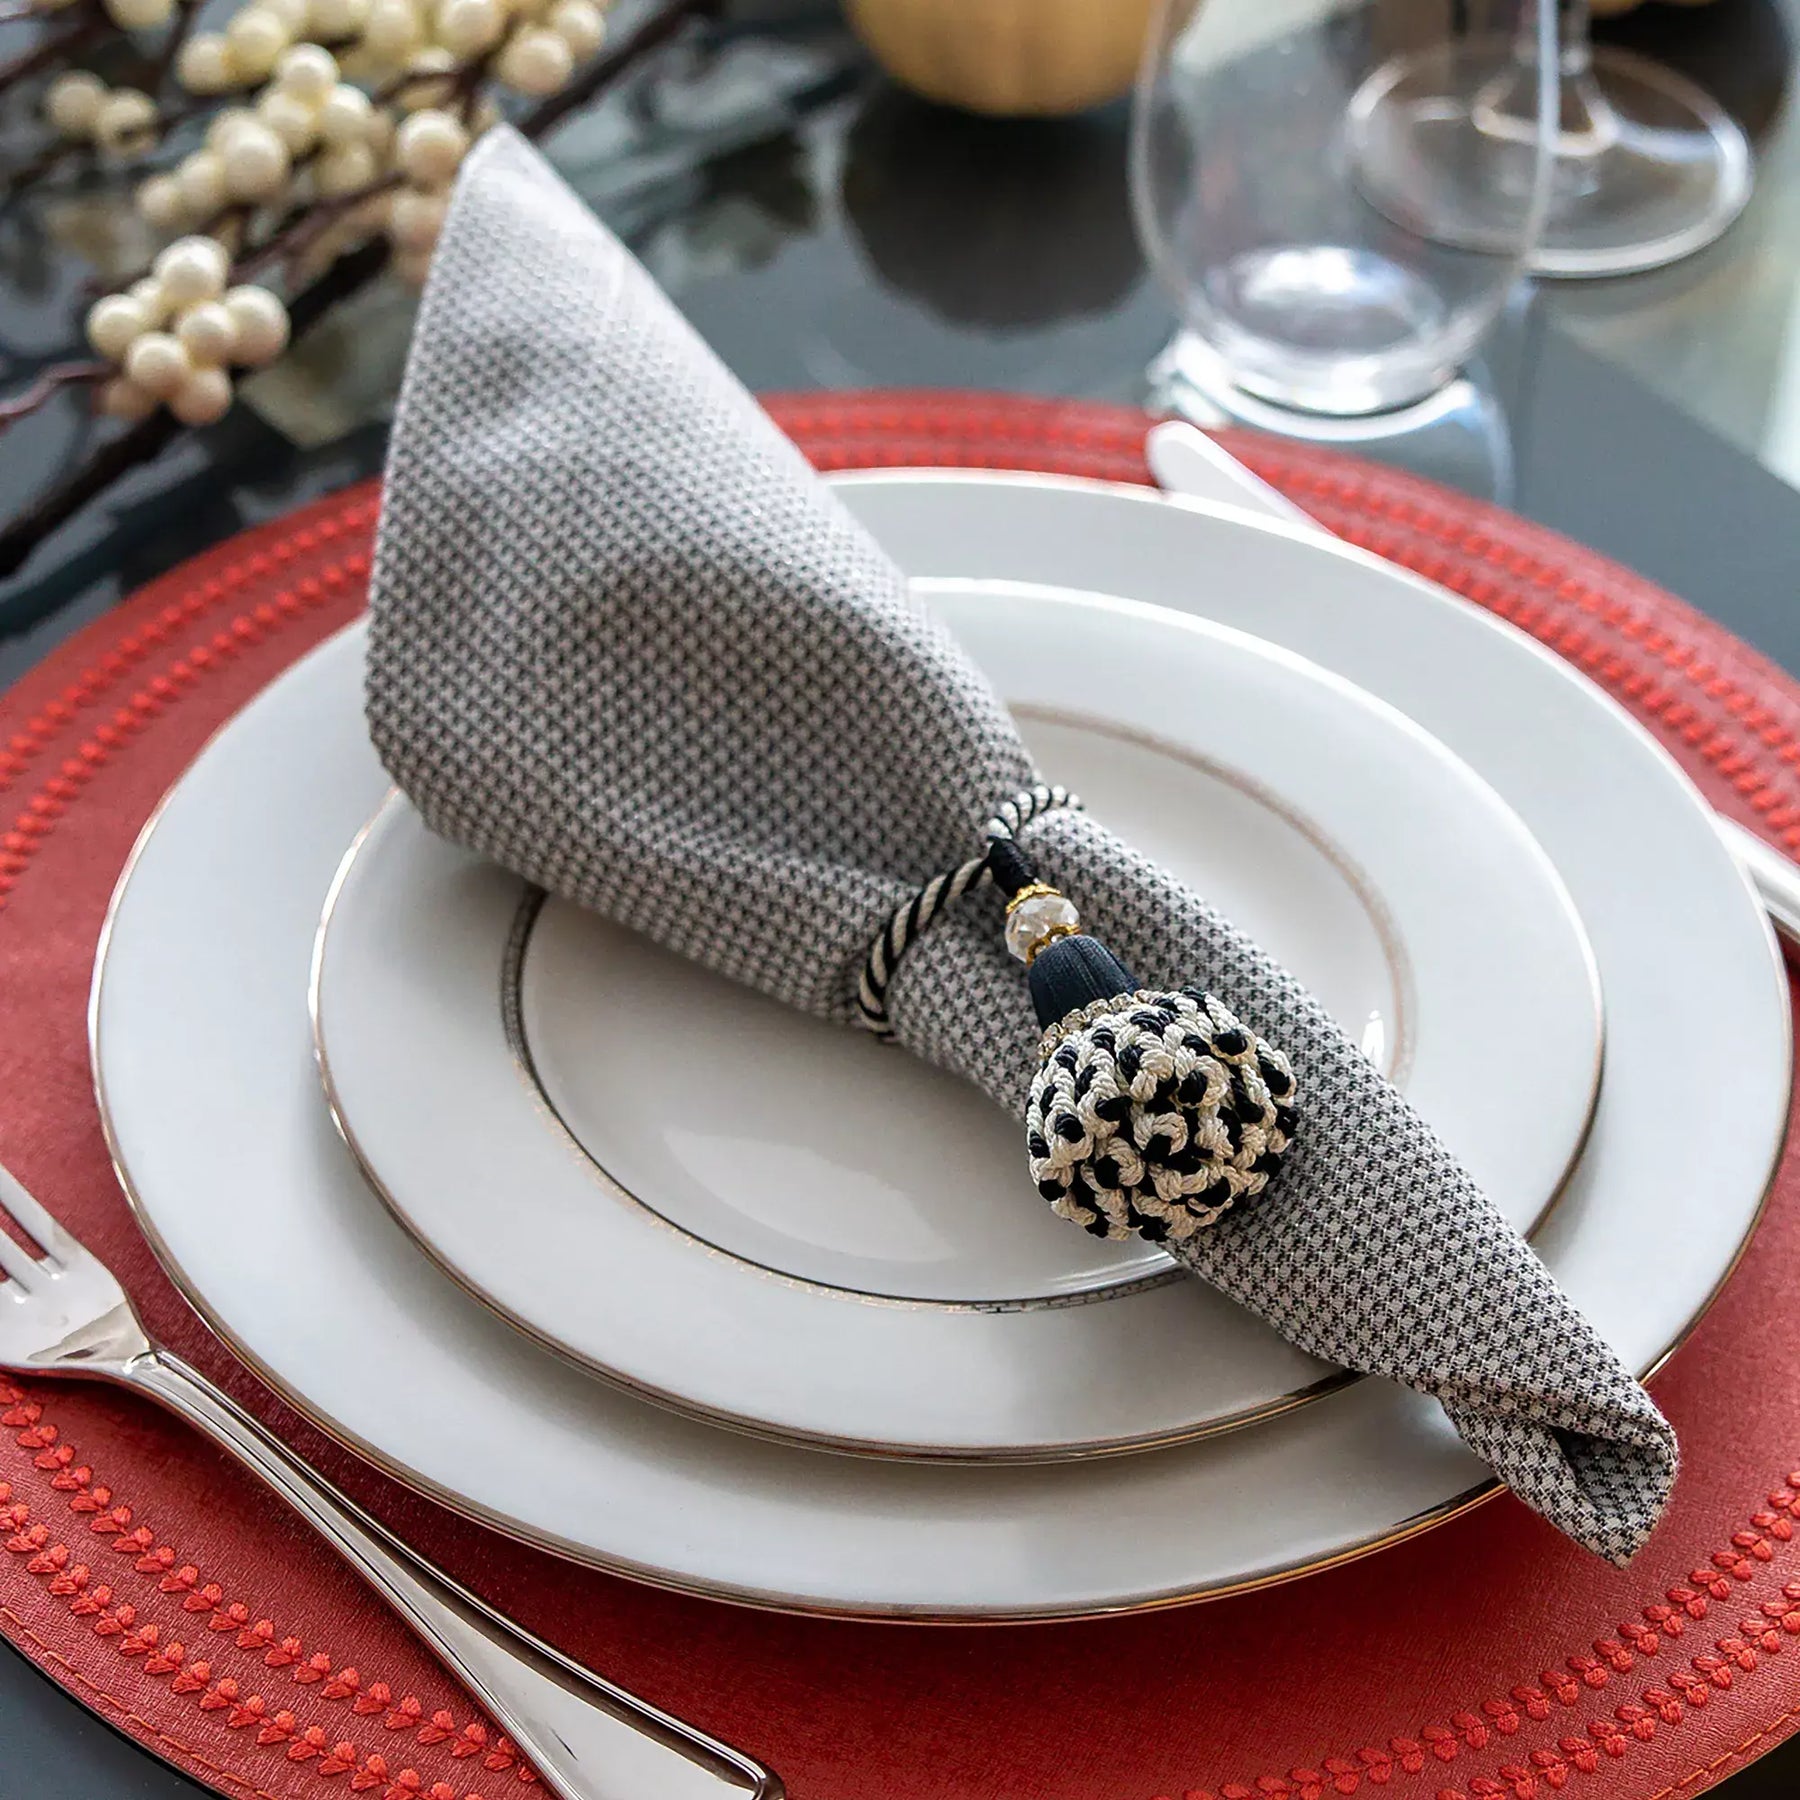 Mode Living Ludlow Napkin with dinnerware on a table